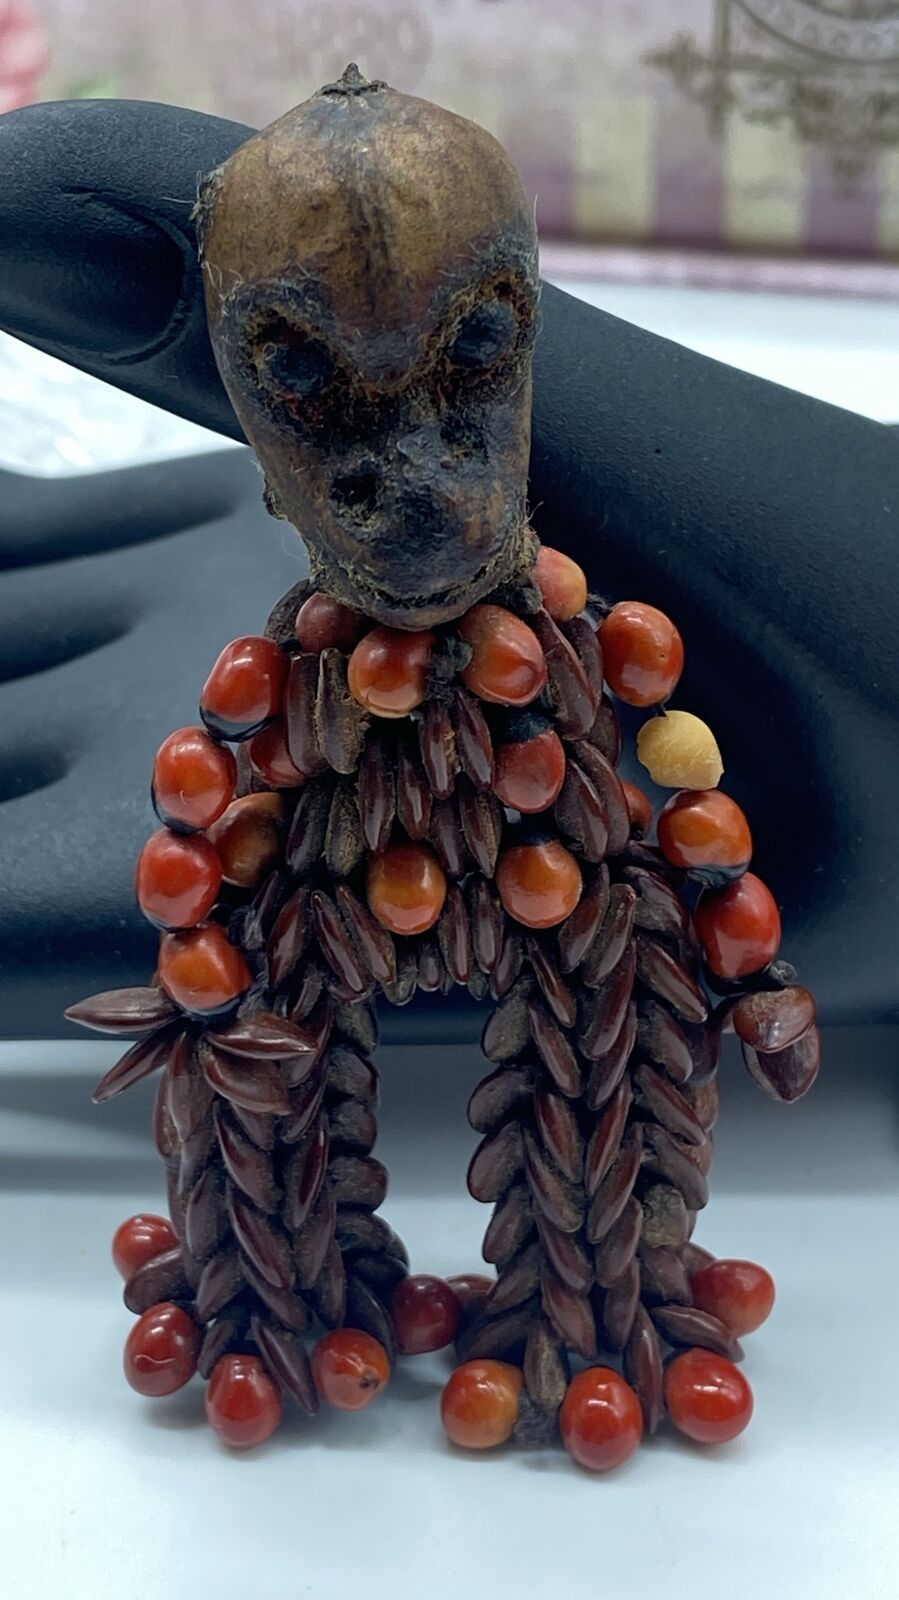 UNIQUE AMAZONIAN HUAYRURO GOOD LUCK SEED DOLL AMULET ??? ODDITY ESTATE FIND